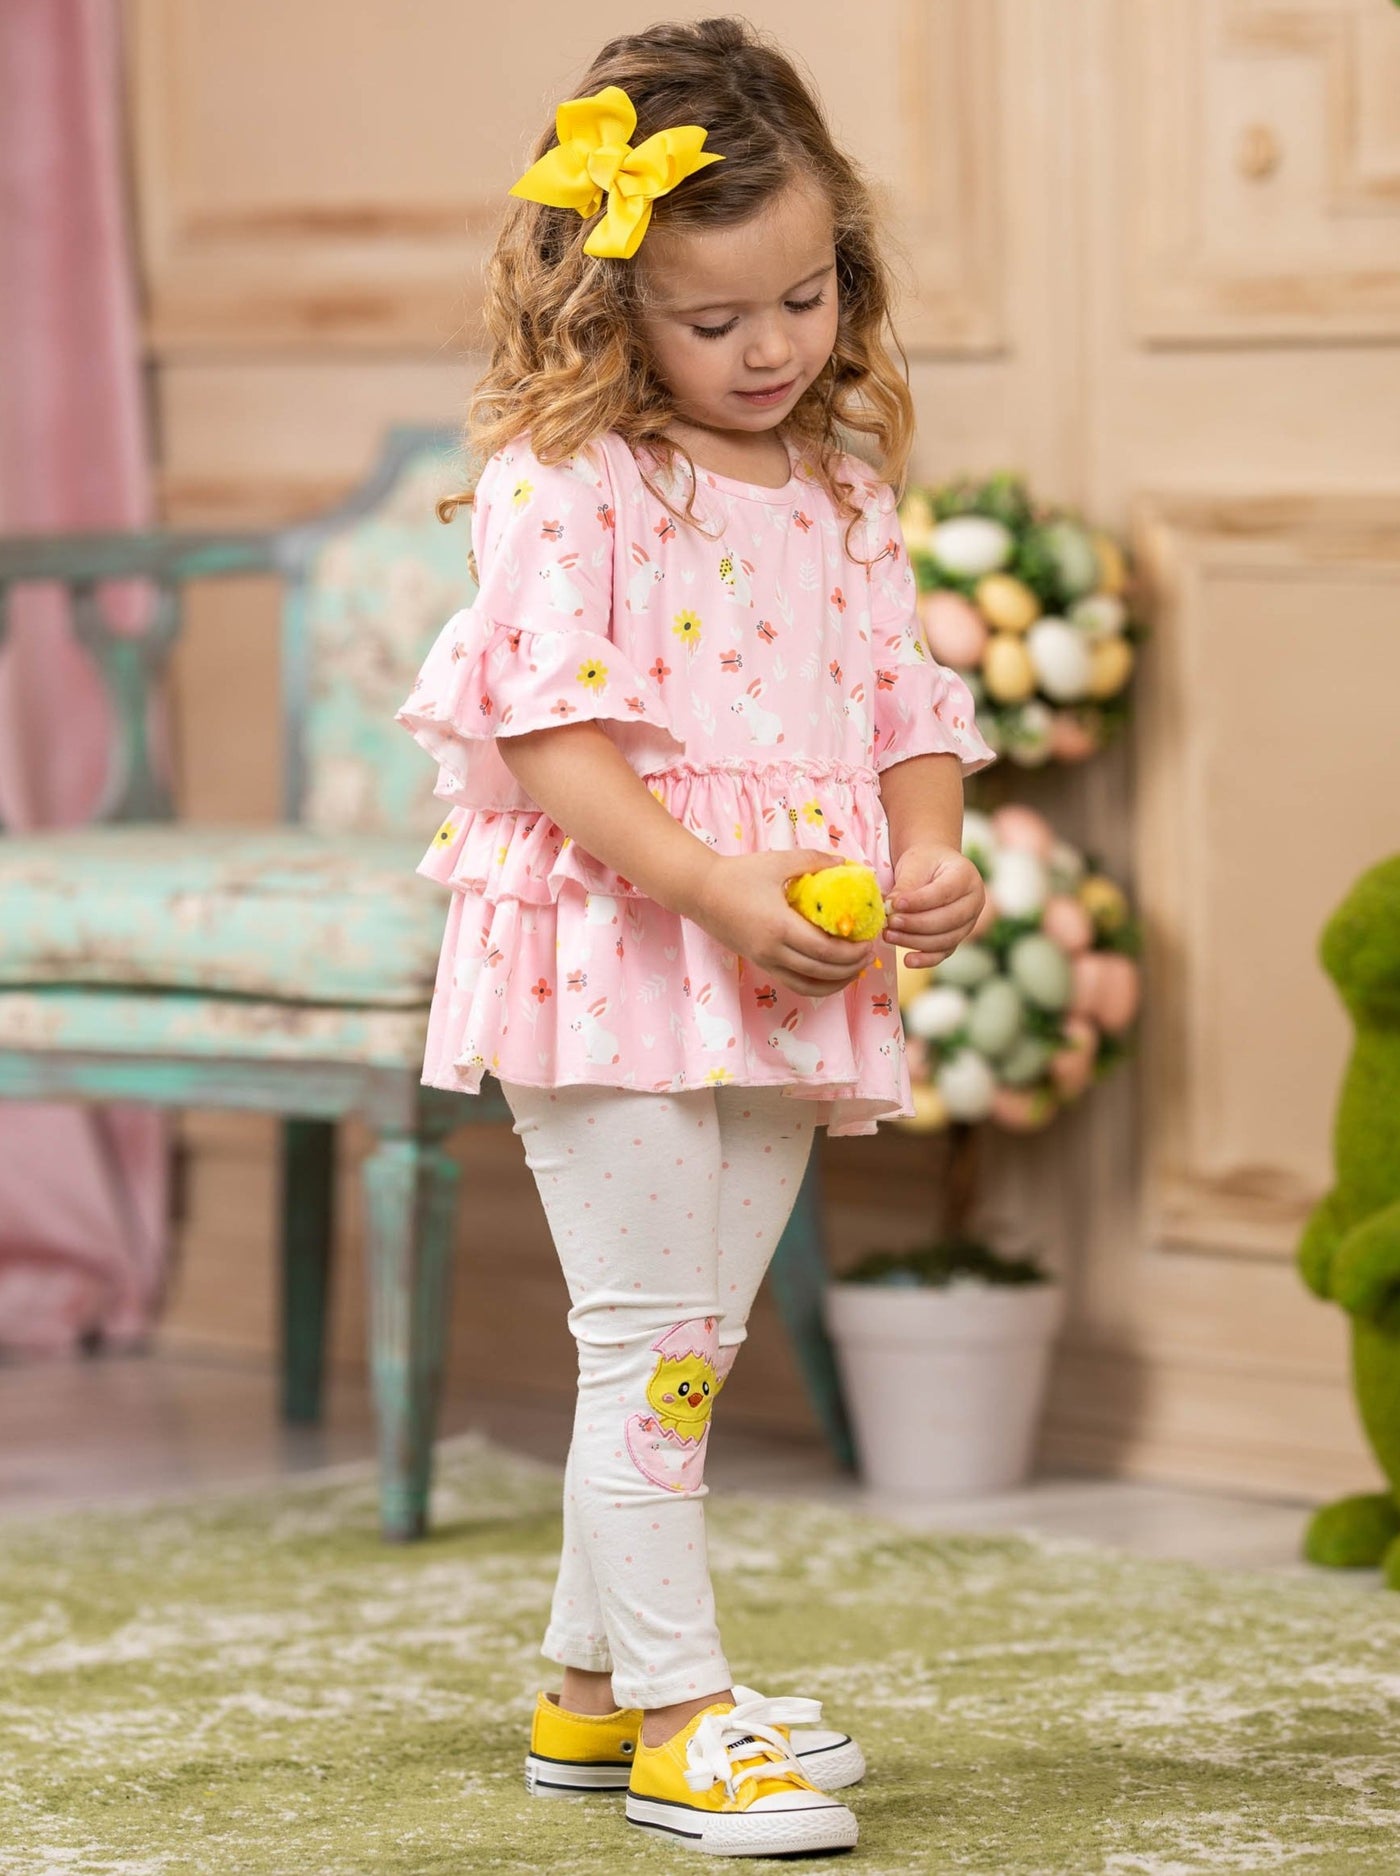 Girls Easter-themed set features a pink ruffled top with chick and bunny print and white polka dot leggings with hatching chick patches on the knees for 2T to 10Y toddlers and girls